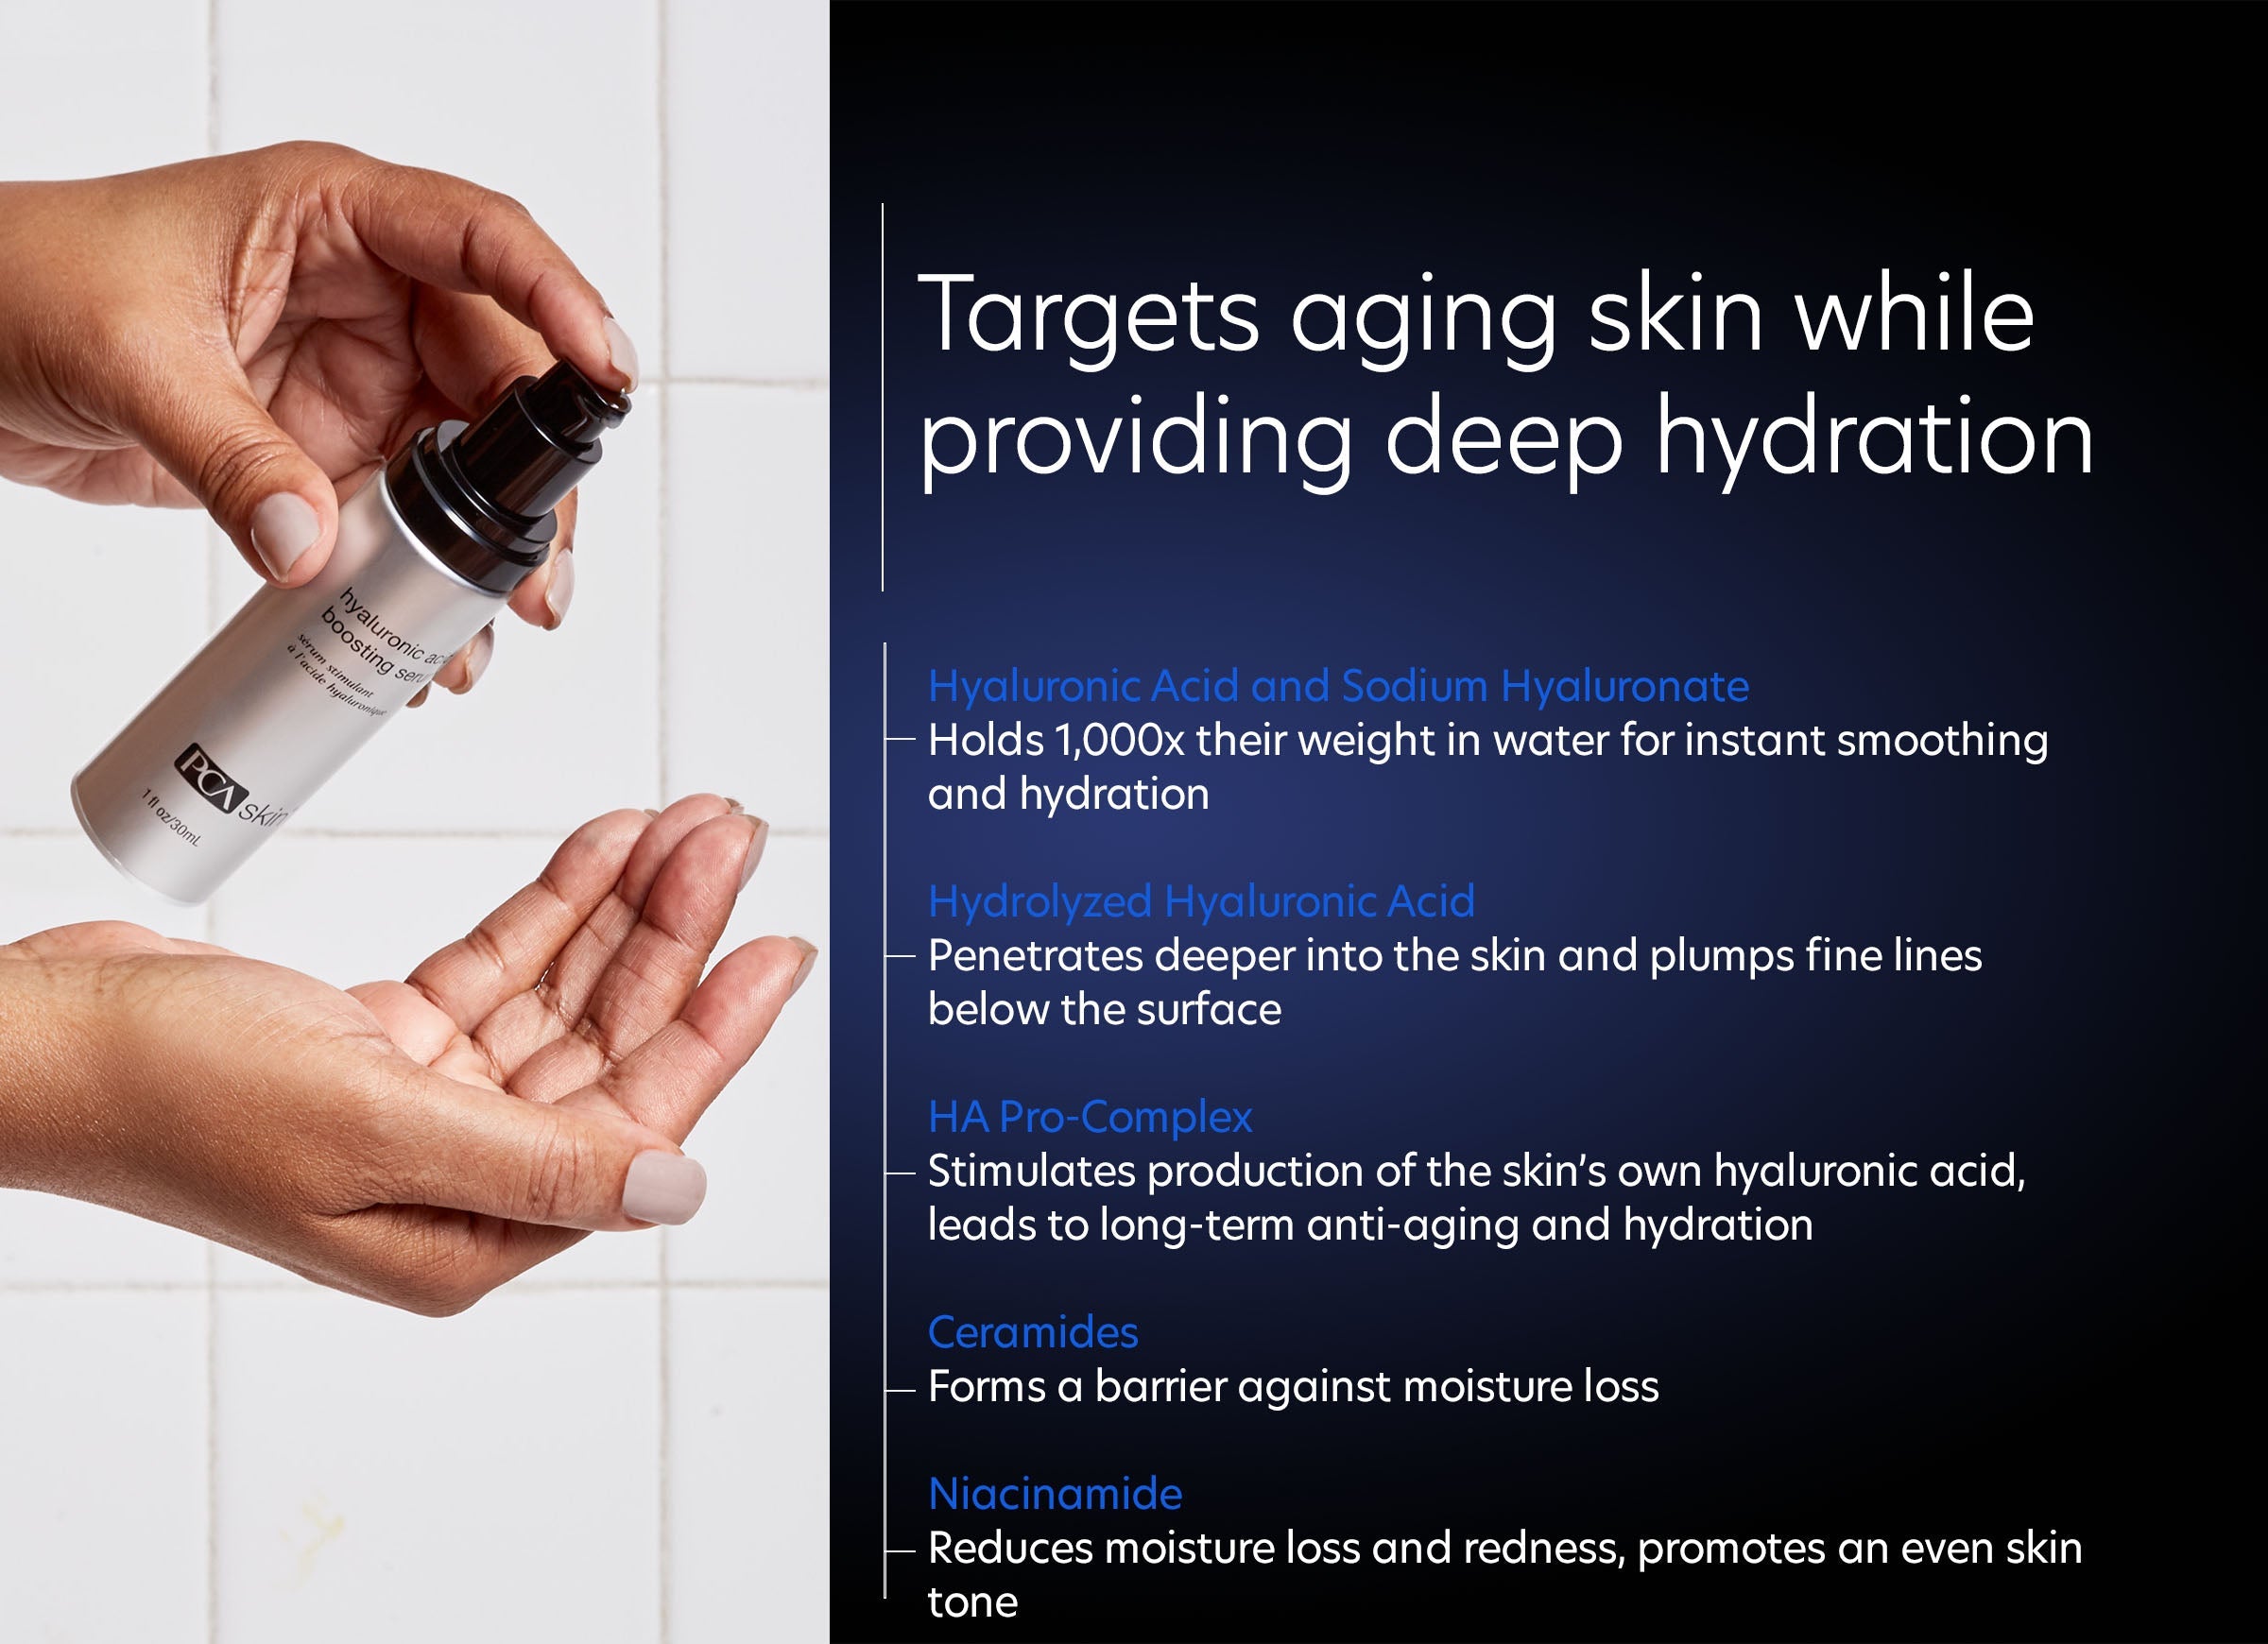 Hyaluronic Acid Boosting Serum - Targets aging skin while providing deep hydration